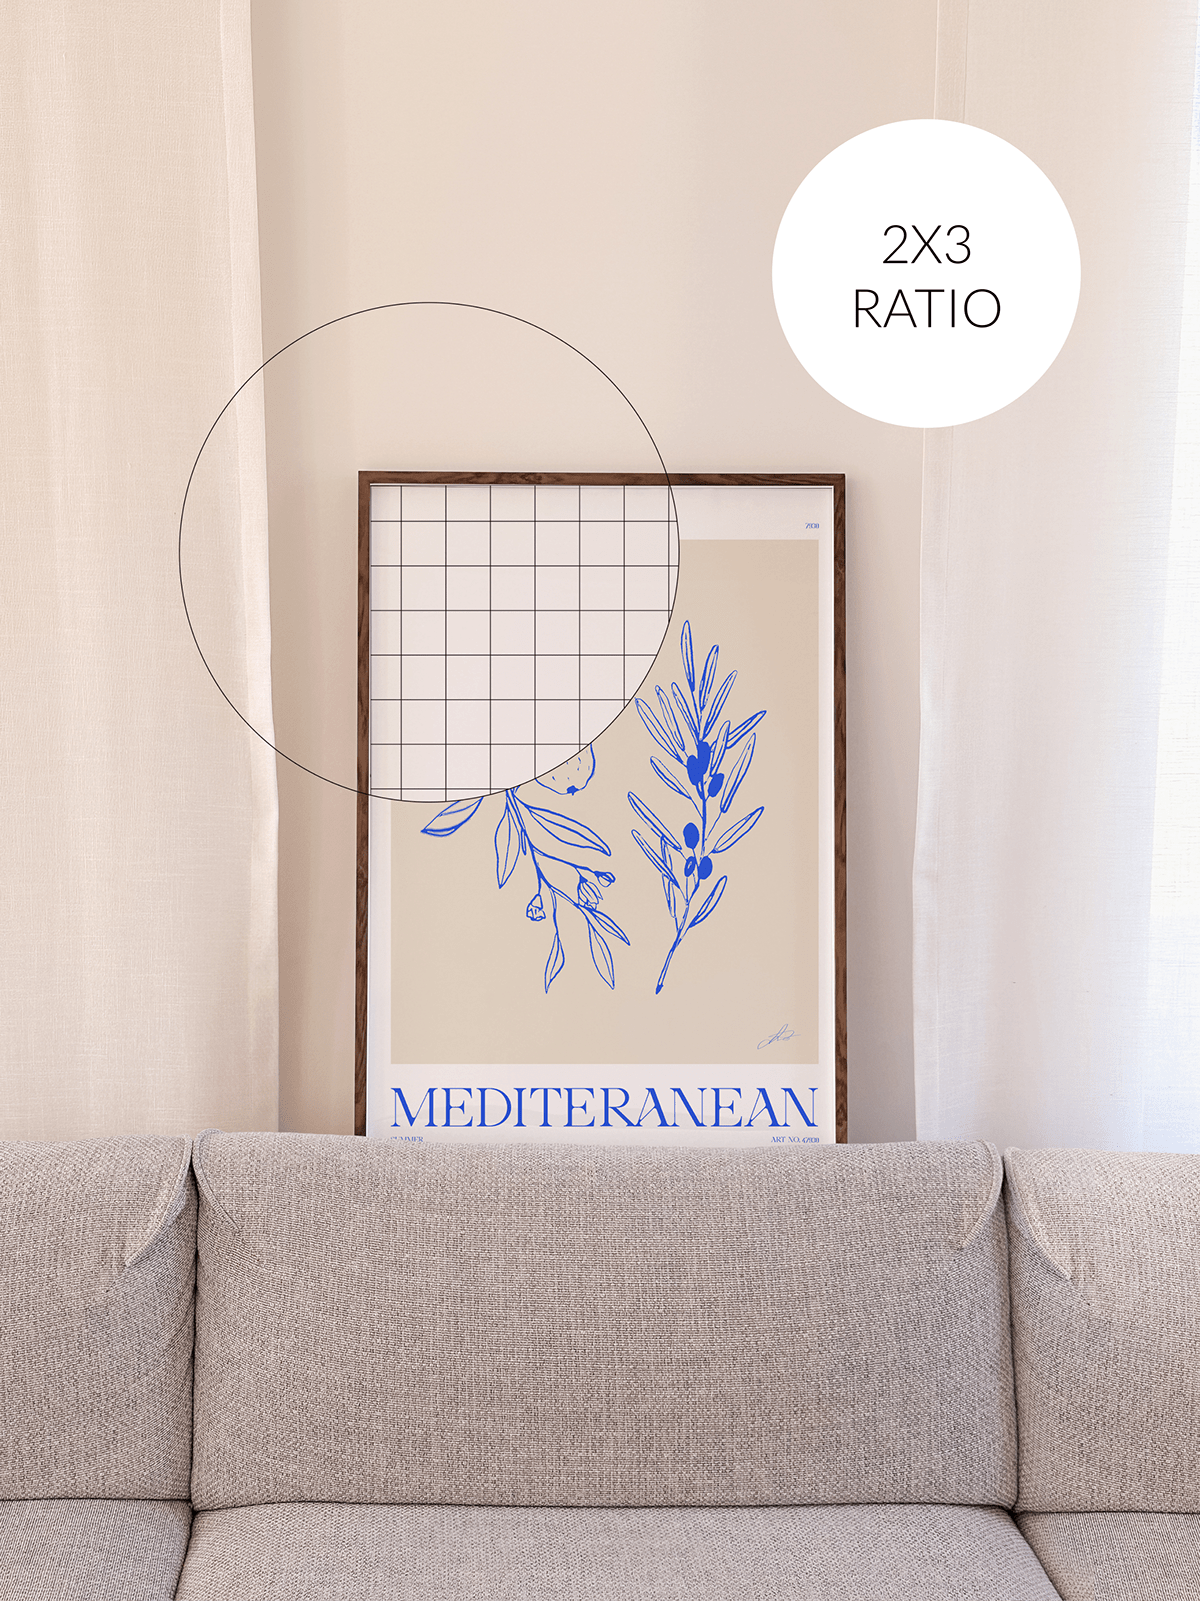 26 2x3 ratio brown wooden frame adjustable .psd mockups download in a minimalist, sunny interior